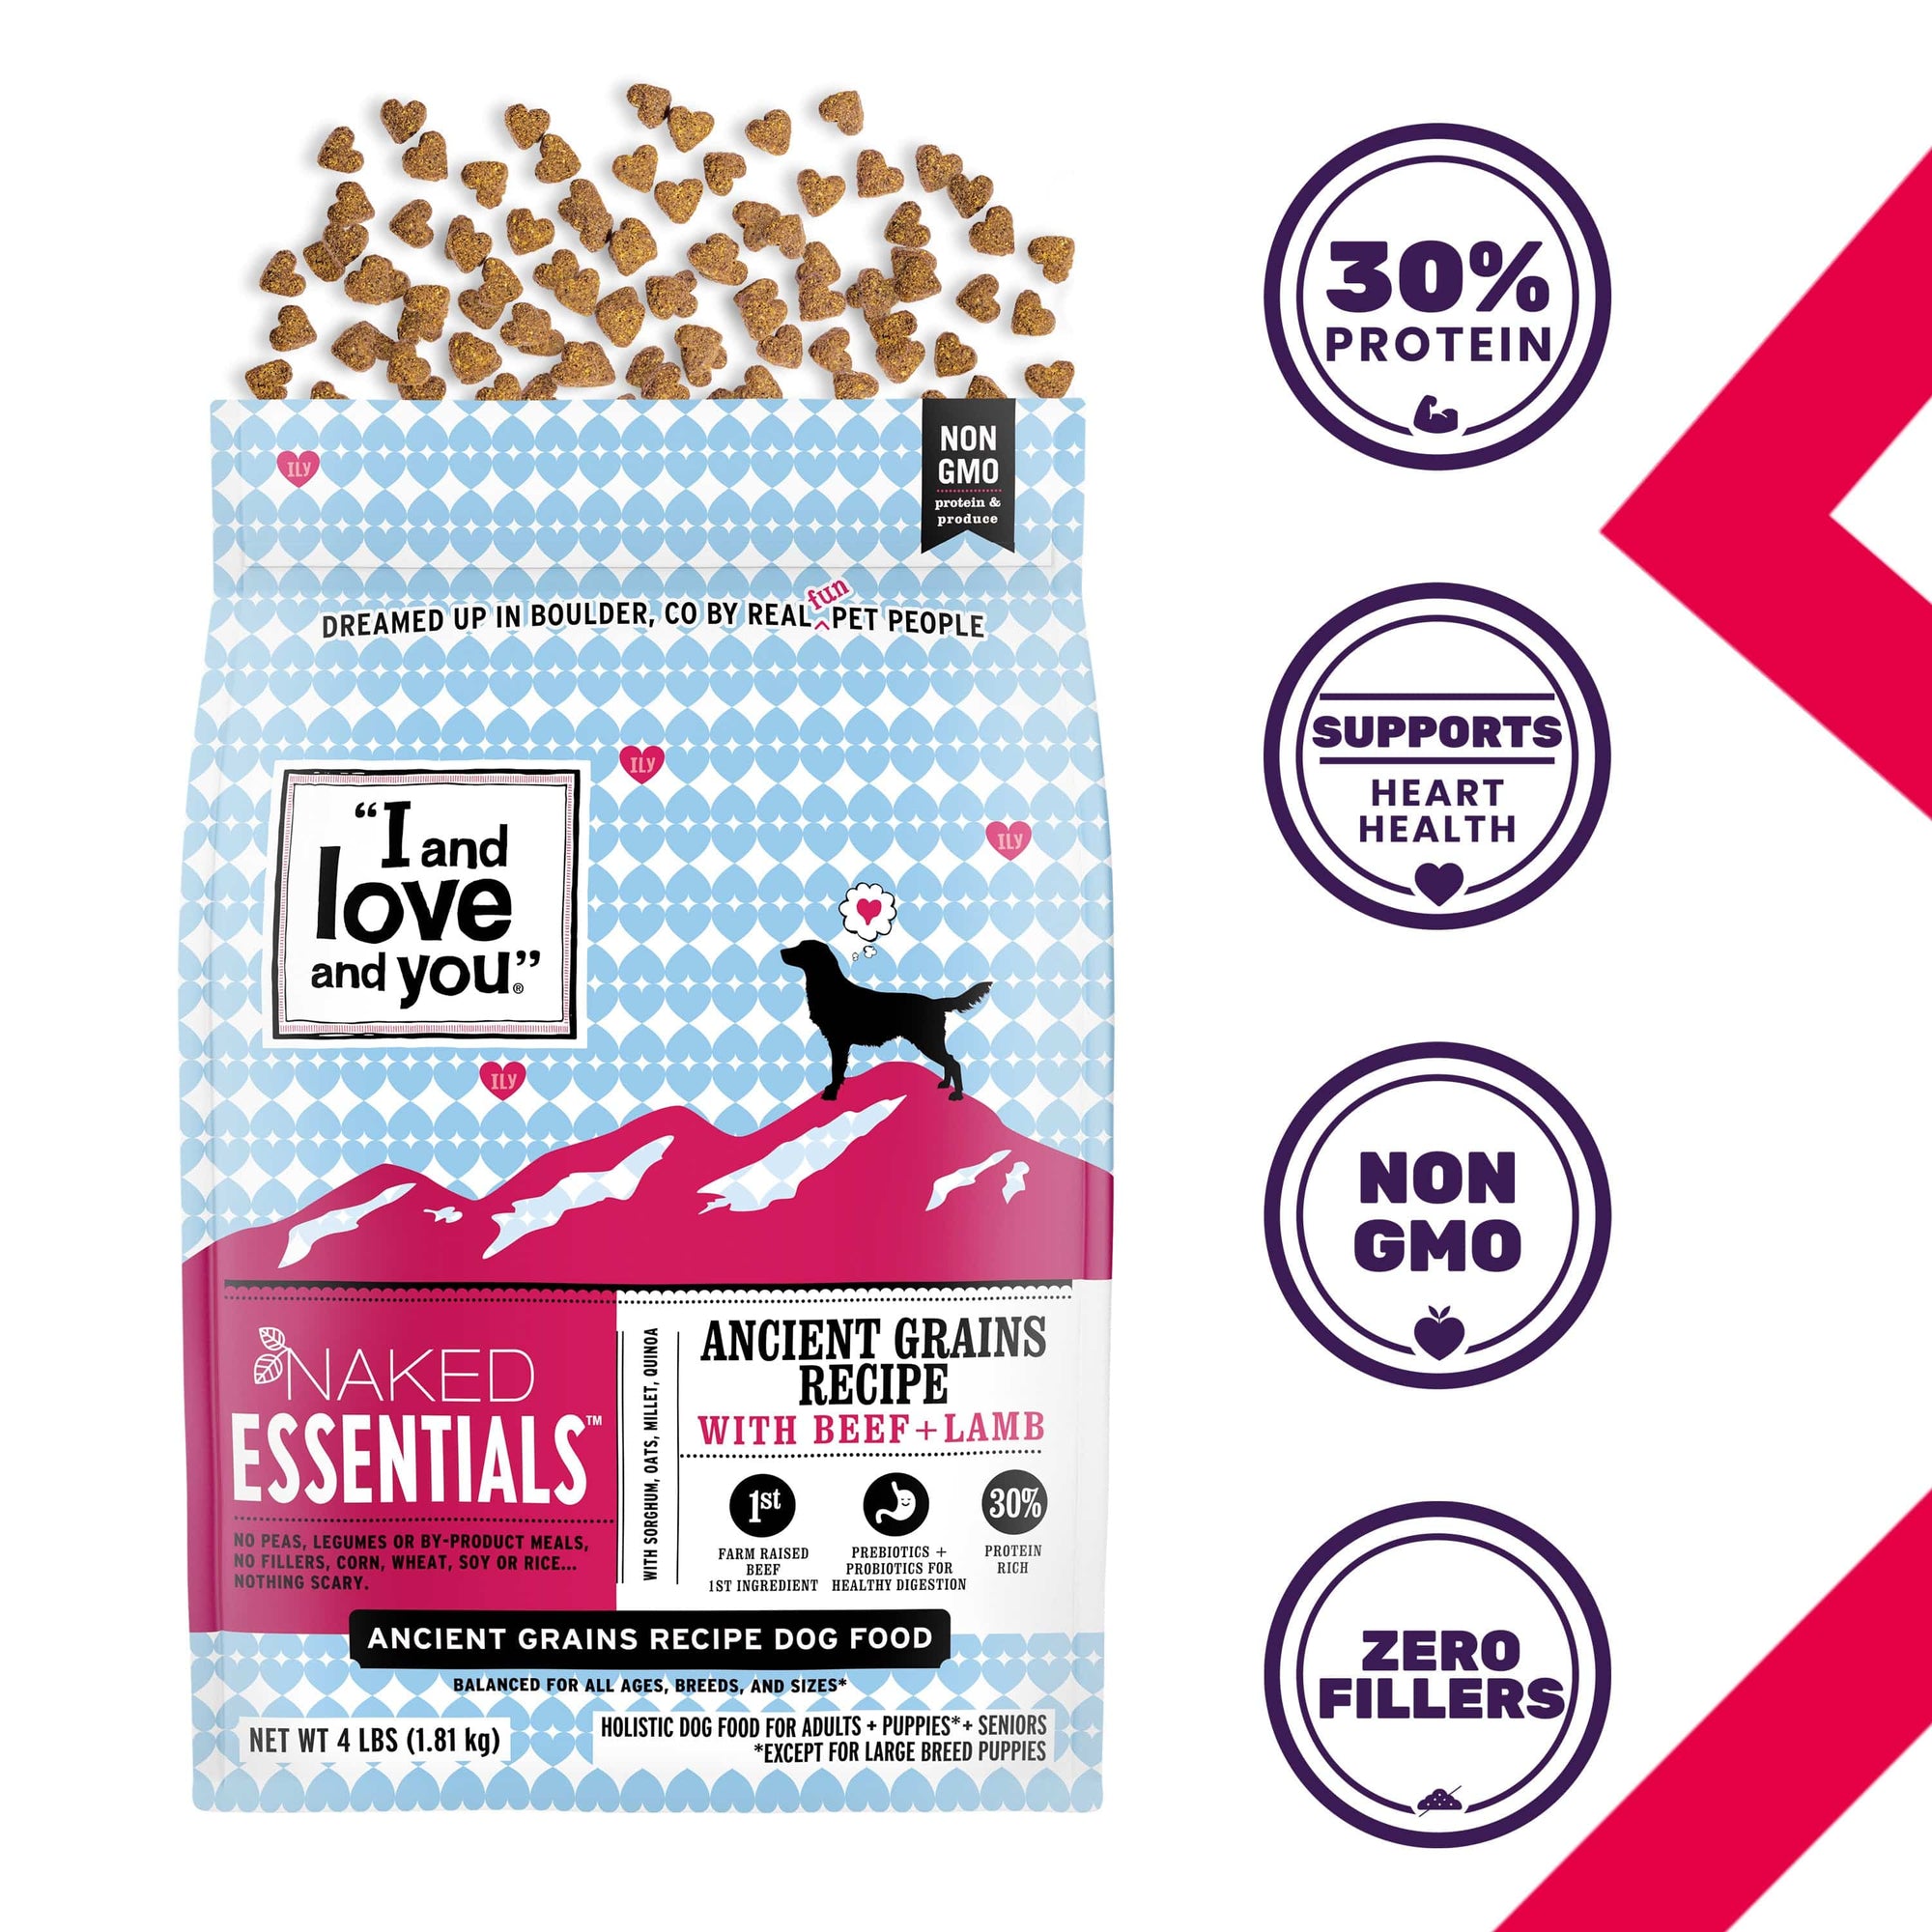 Silhouette of a dog with a bag of kibble, heart-shaped food, and text signs.